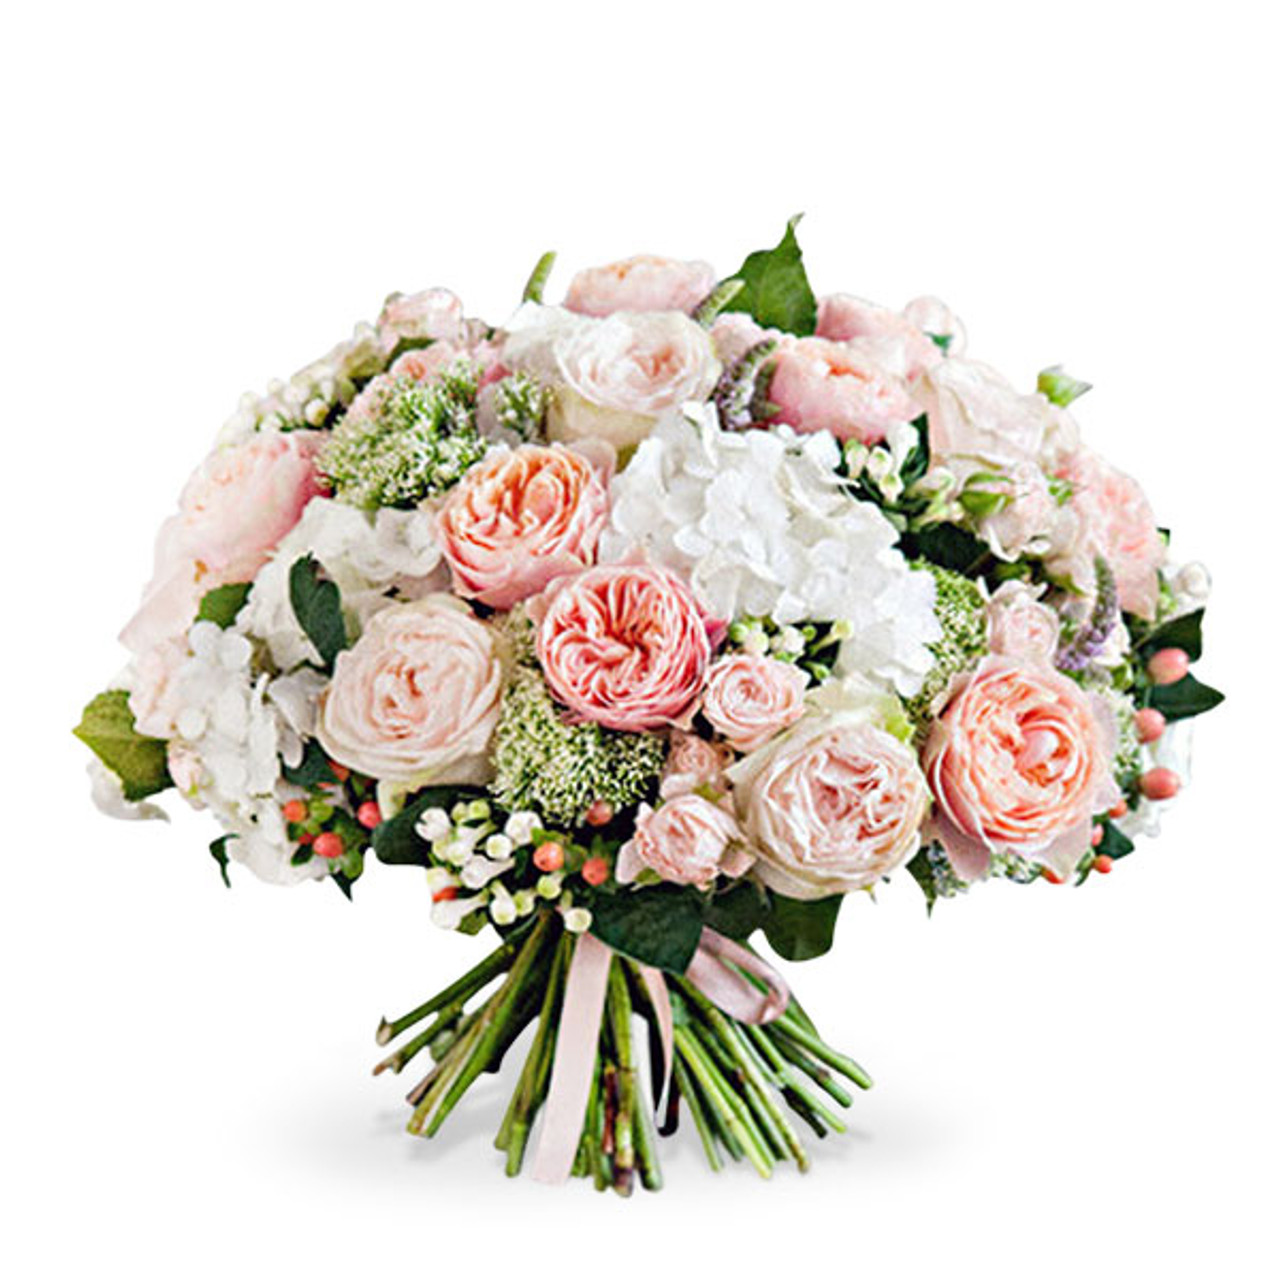 divine mix of luxury roses and seasonal summer time flowers